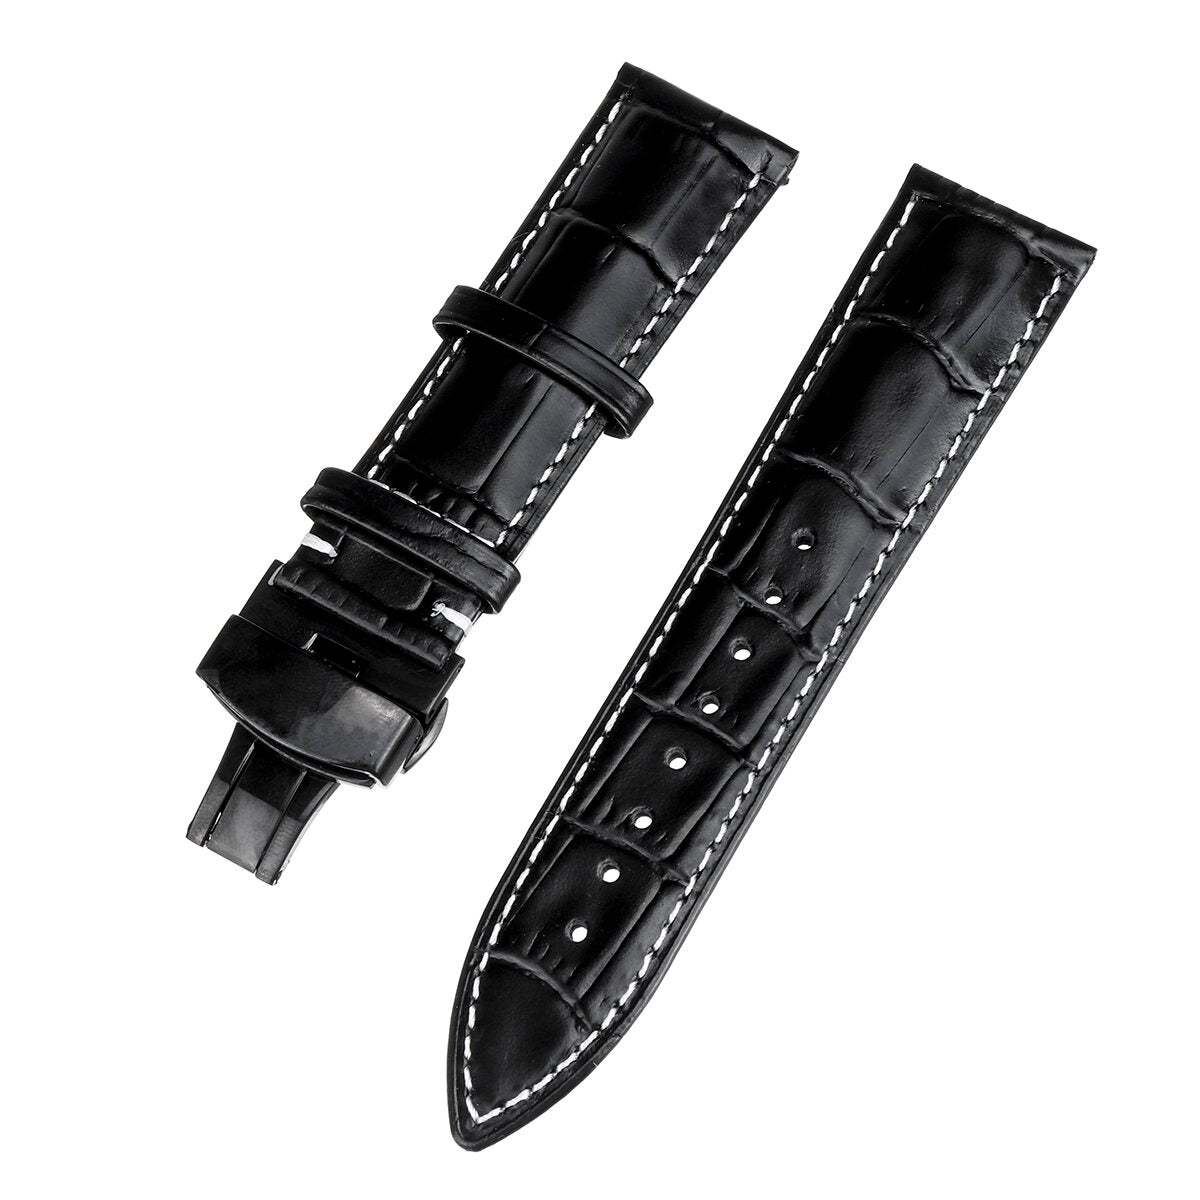 22mm Genuine Leather Watch Band Strap Kit Butterfly Deployment Clasp